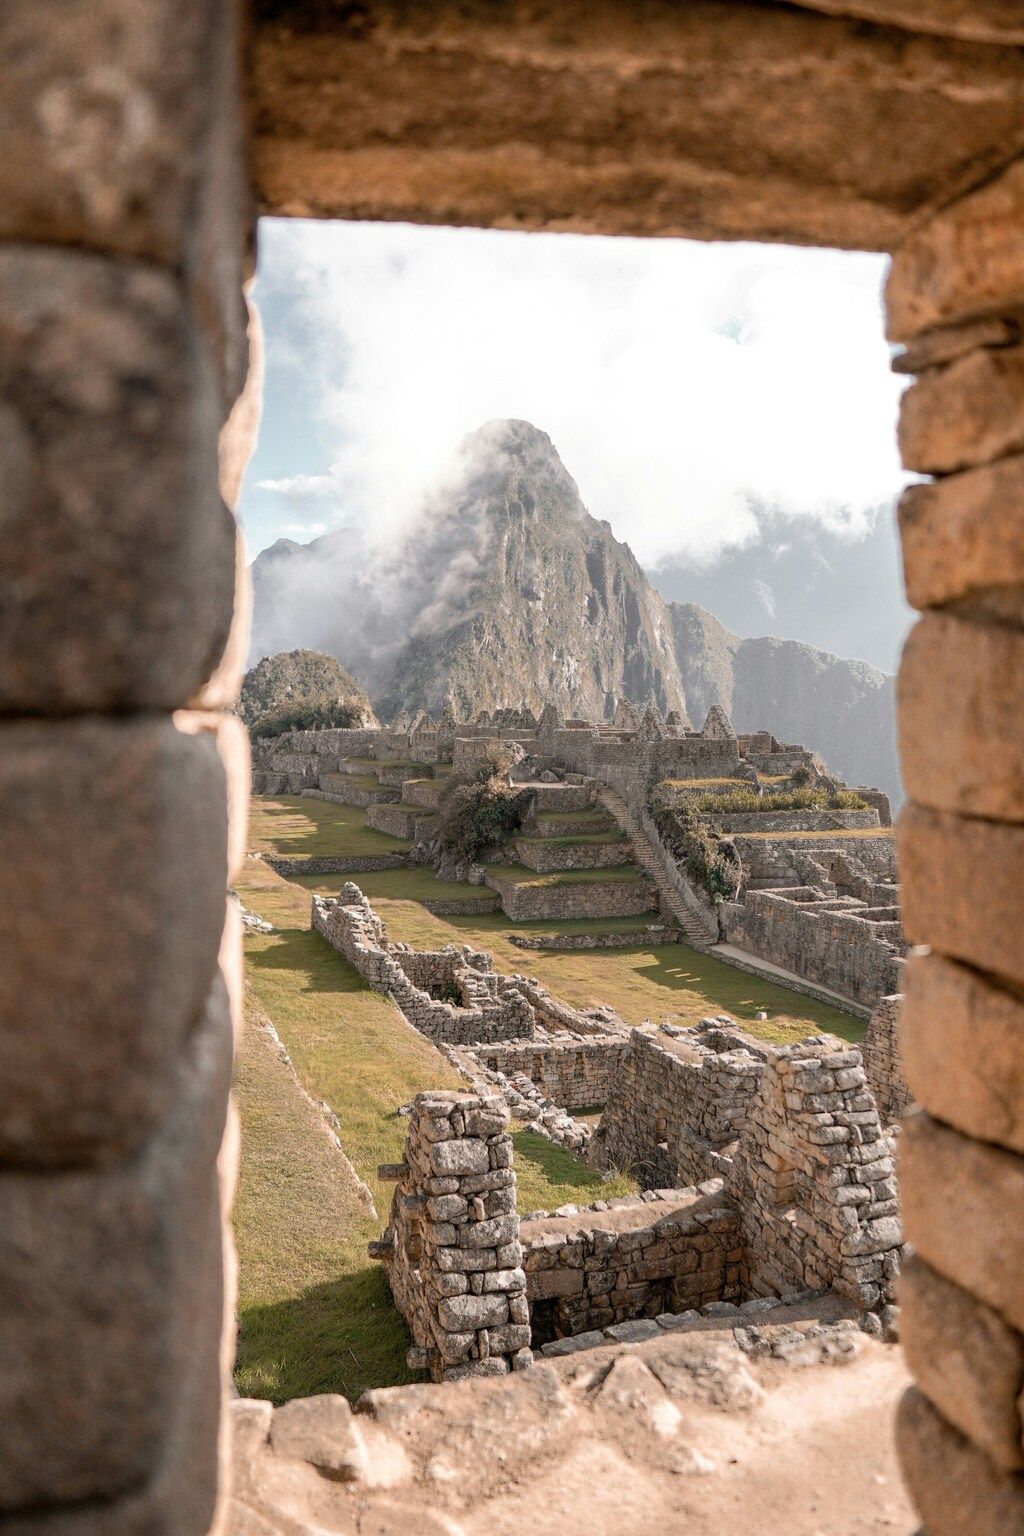 View of Machu Picchu framed by ancient stone structures